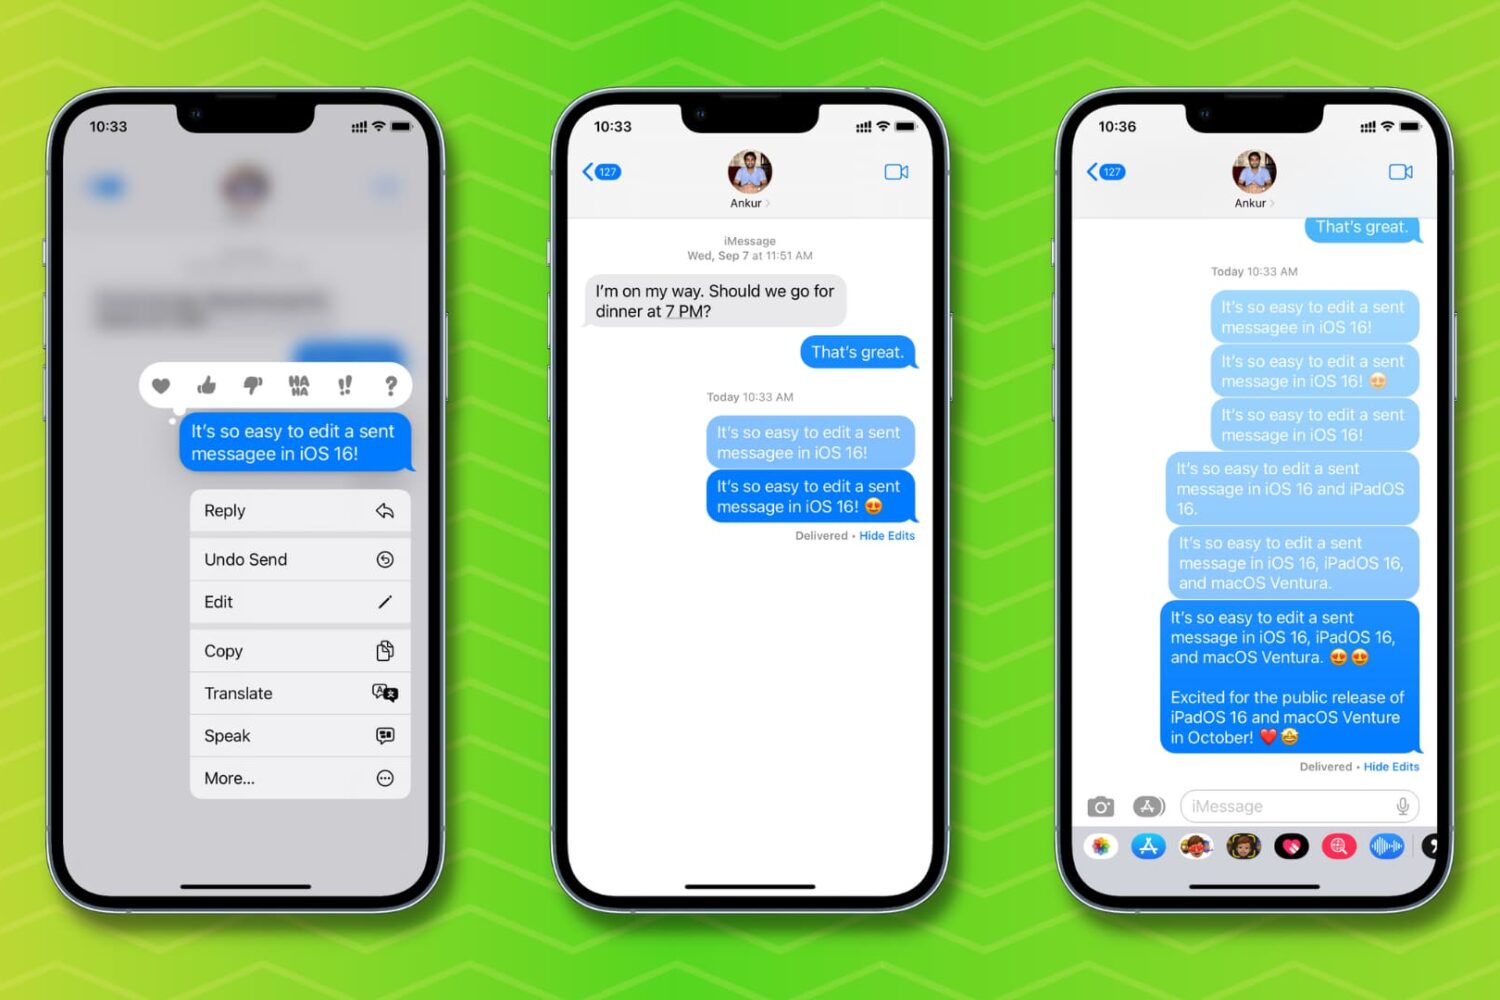 Three screenshots showing the steps to edit a sent message up to five times in iOS 16